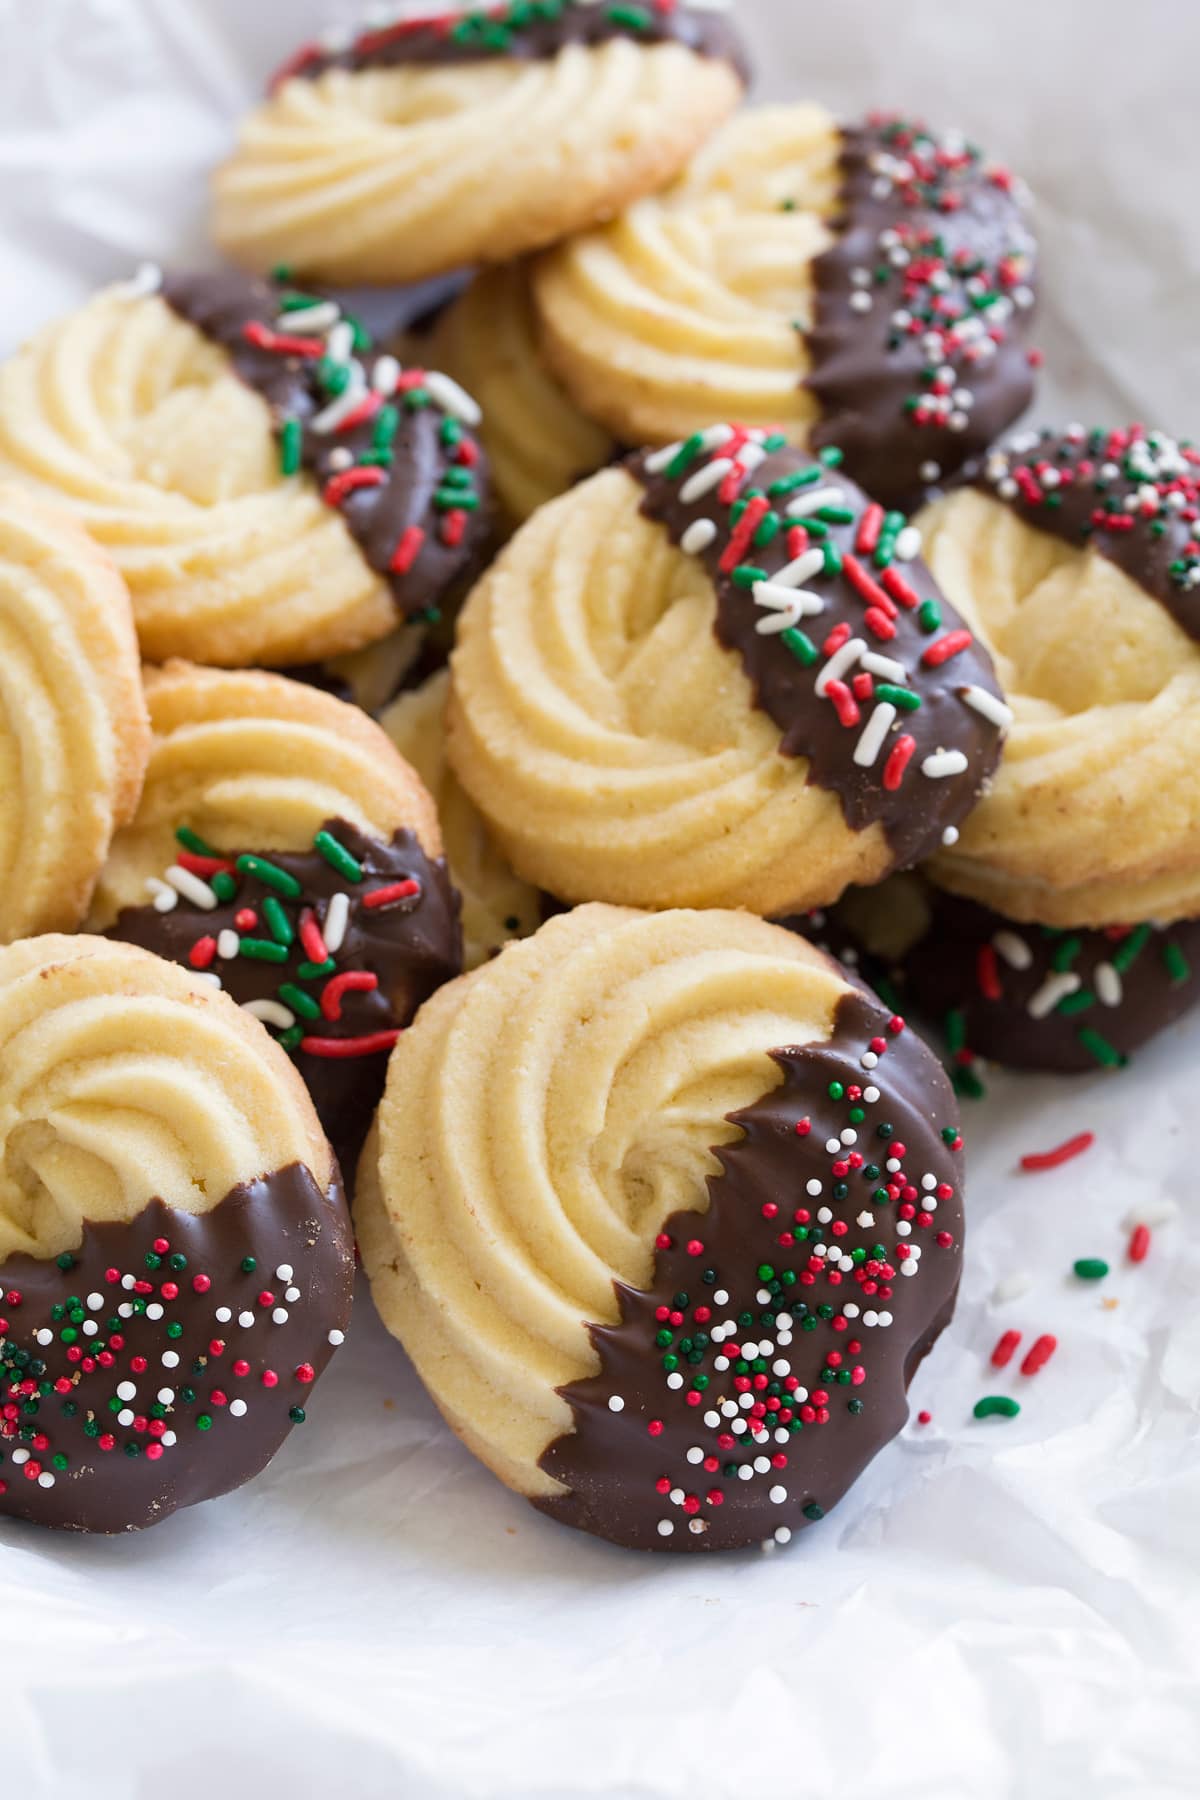 Butter cookies dipped in chocolate and covered with Christmas sprinkles.